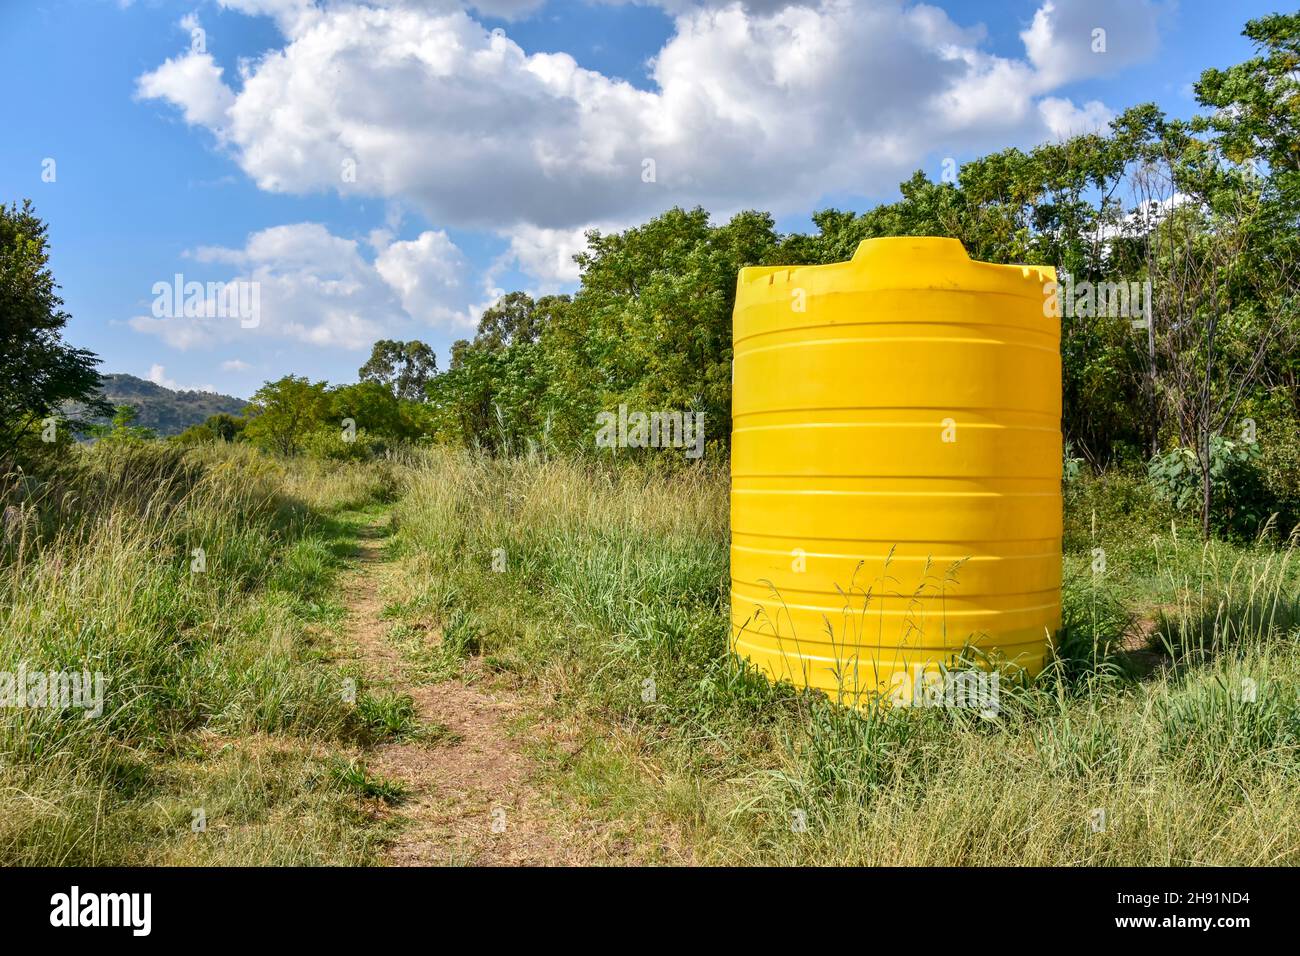 A large industrial sized yellow container containing thousands of liters of water standing in a farm near a field in South Africa used to store water Stock Photo